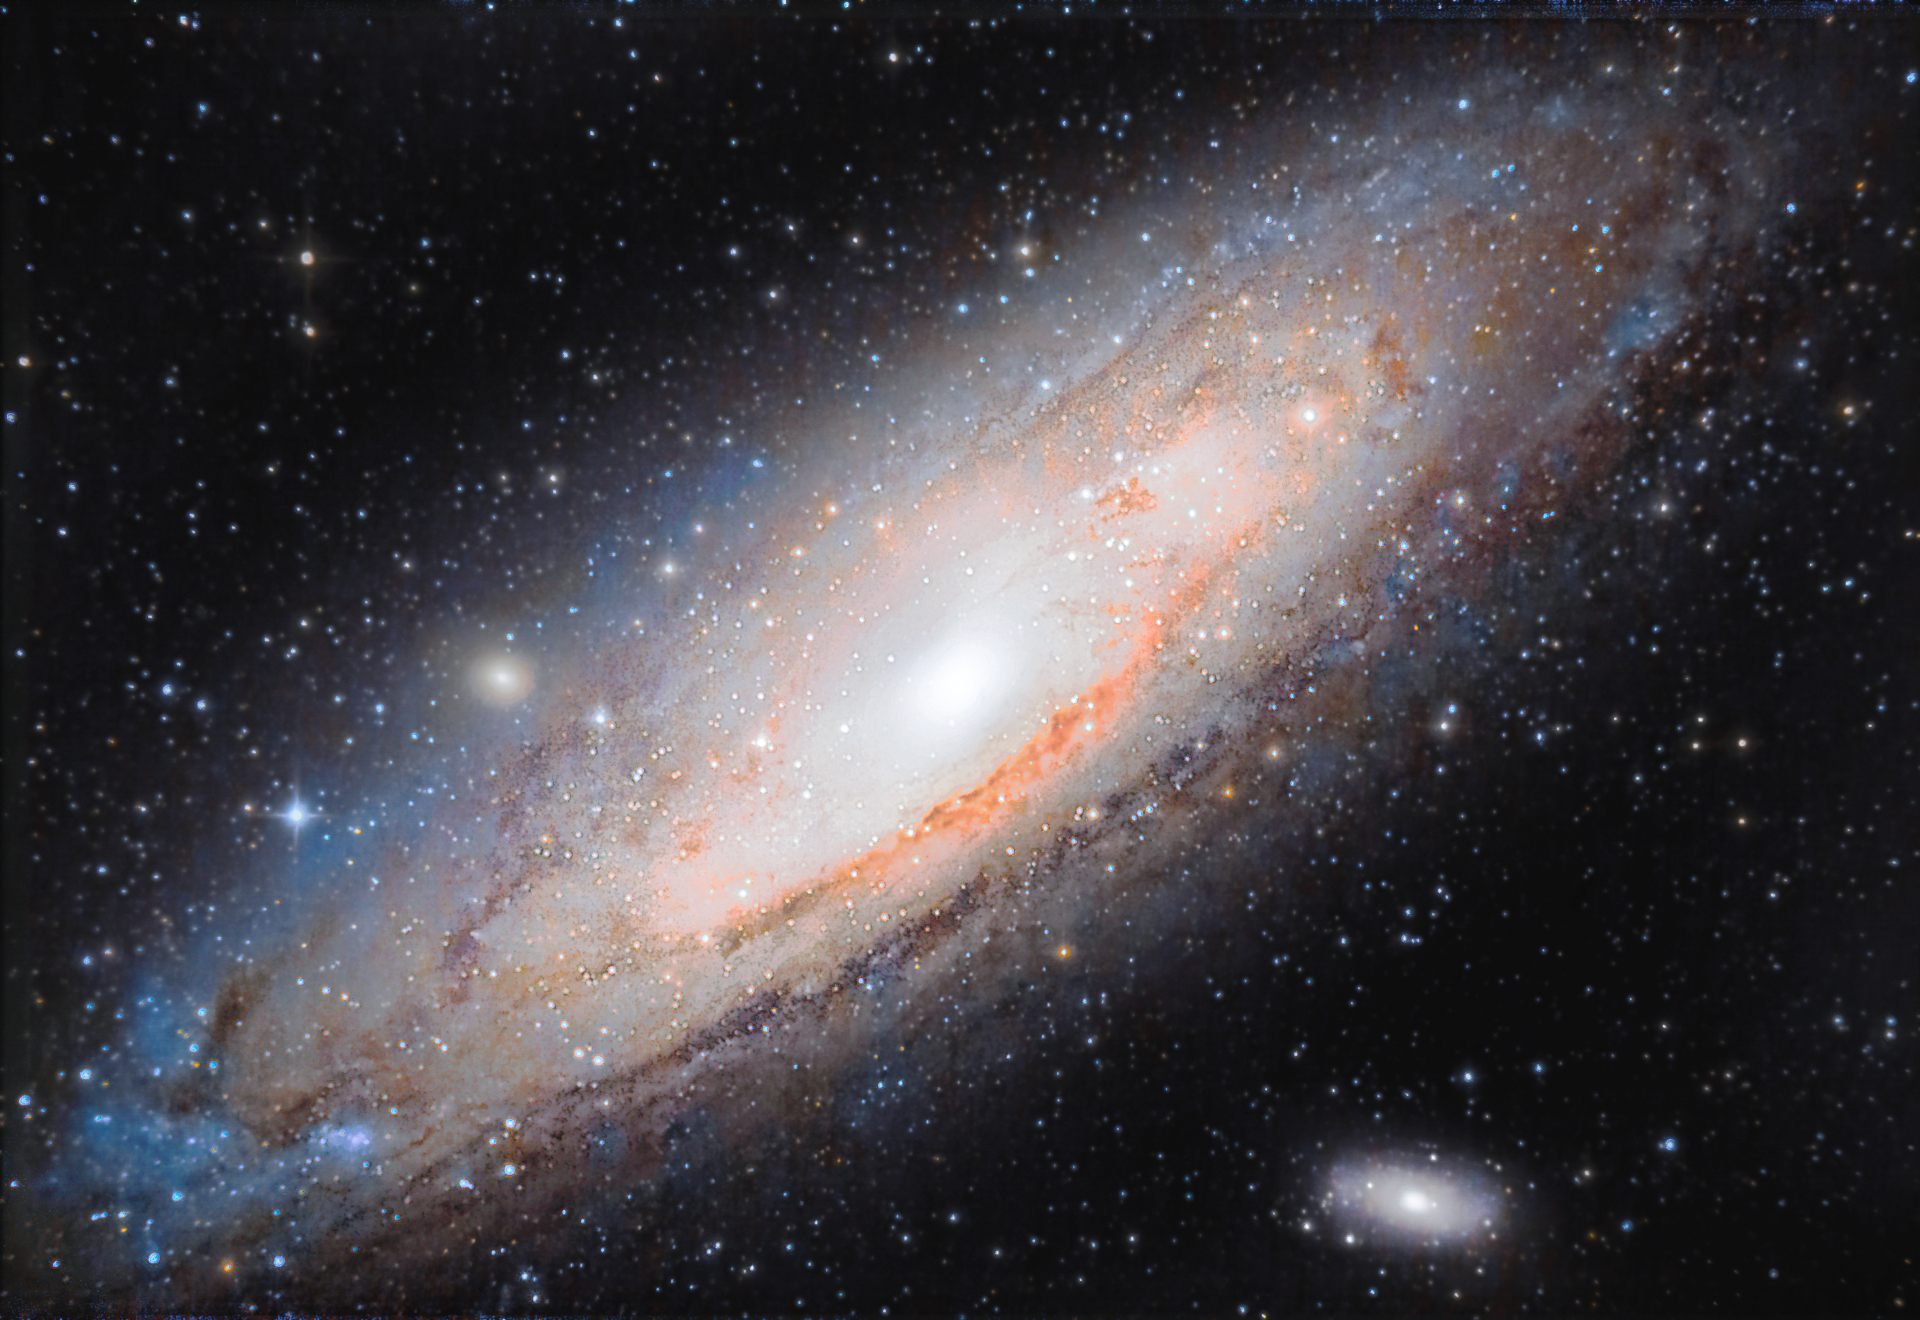 The magnificent andromeda galaxy...